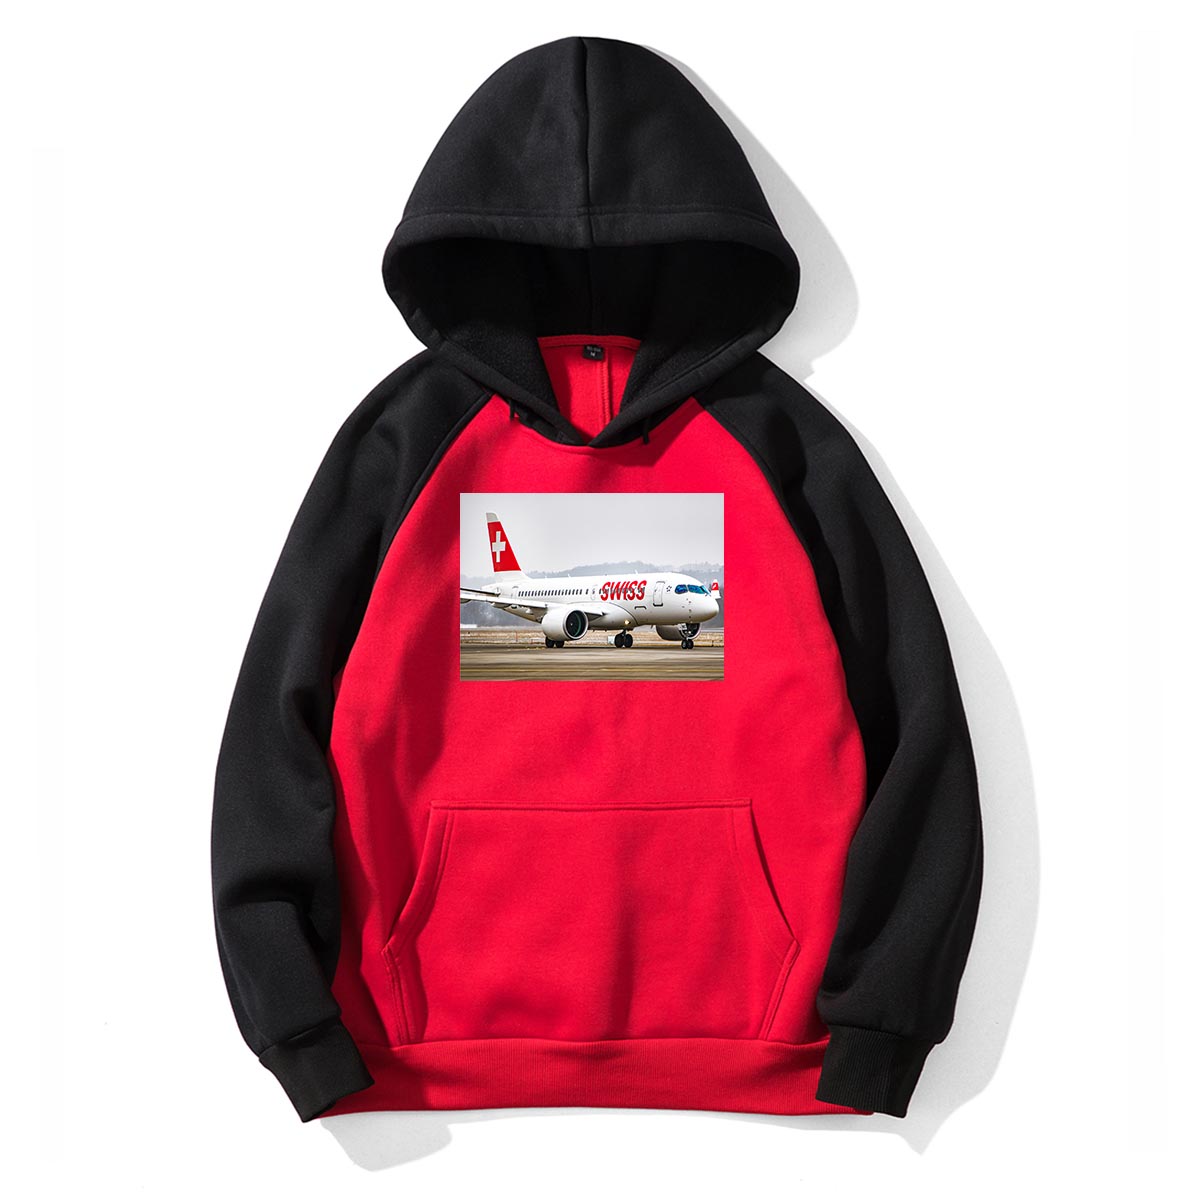 Swiss Airlines Bombardier CS100 Designed Colourful Hoodies